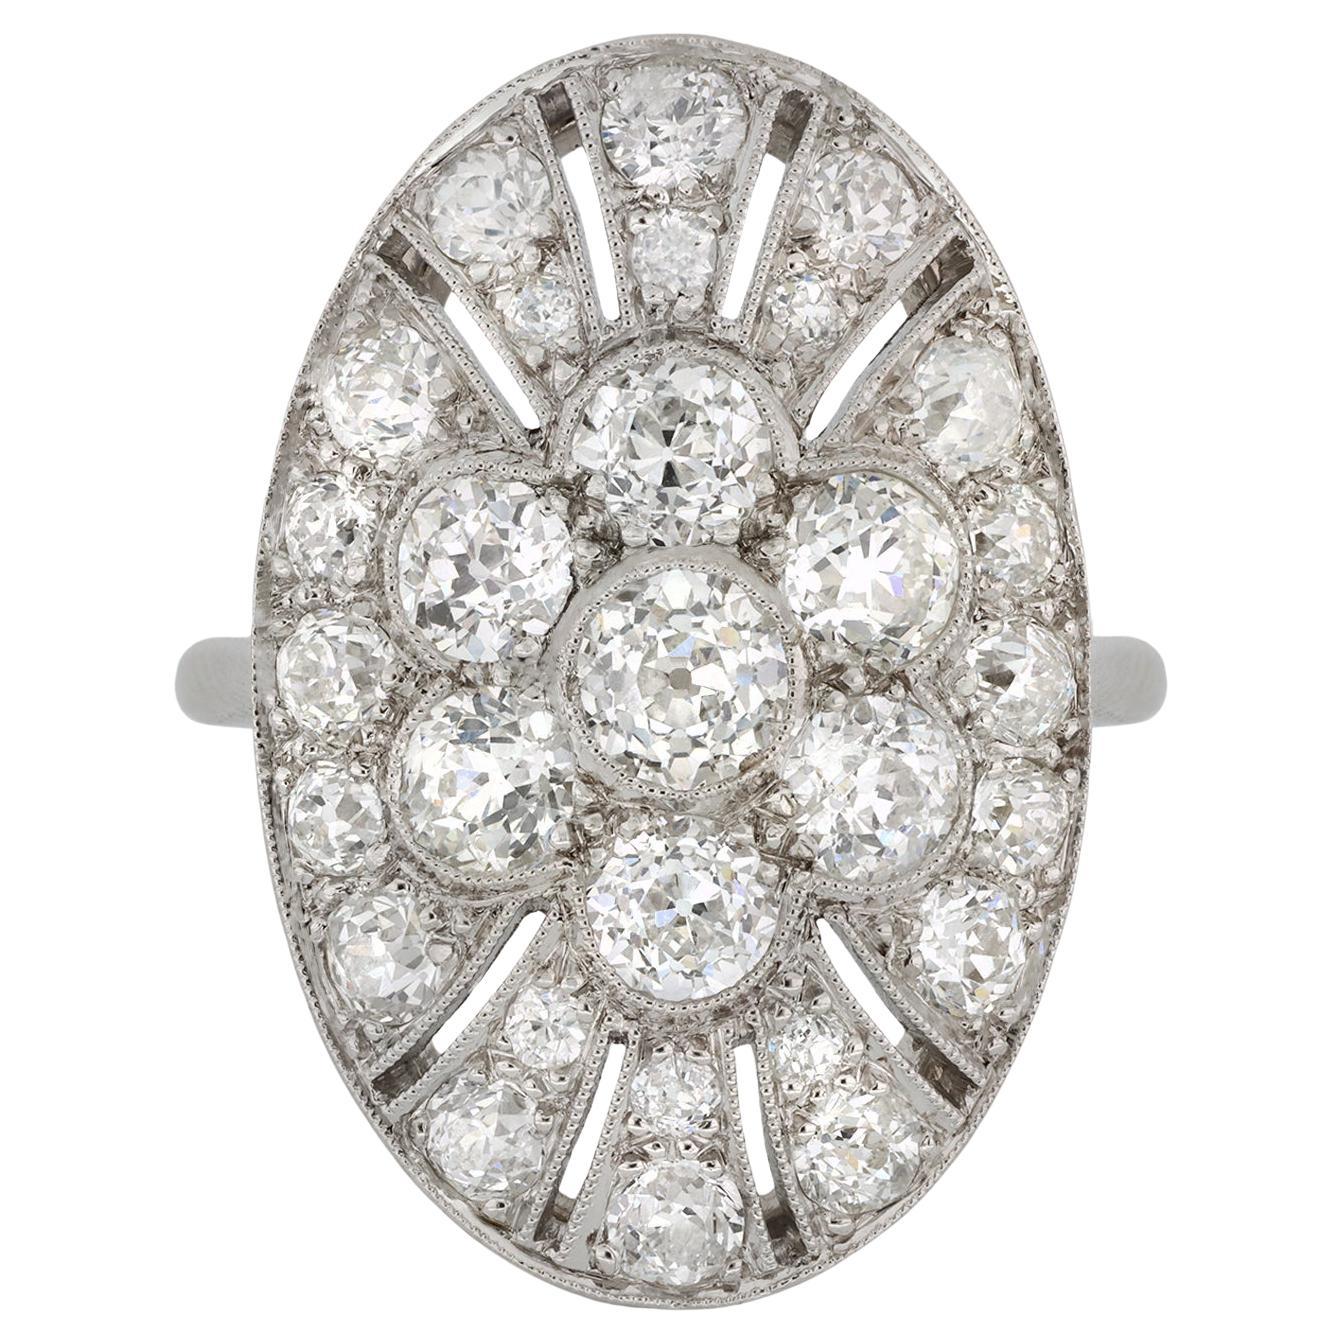 Oval Diamond Cocktail Ring, circa 1920. For Sale